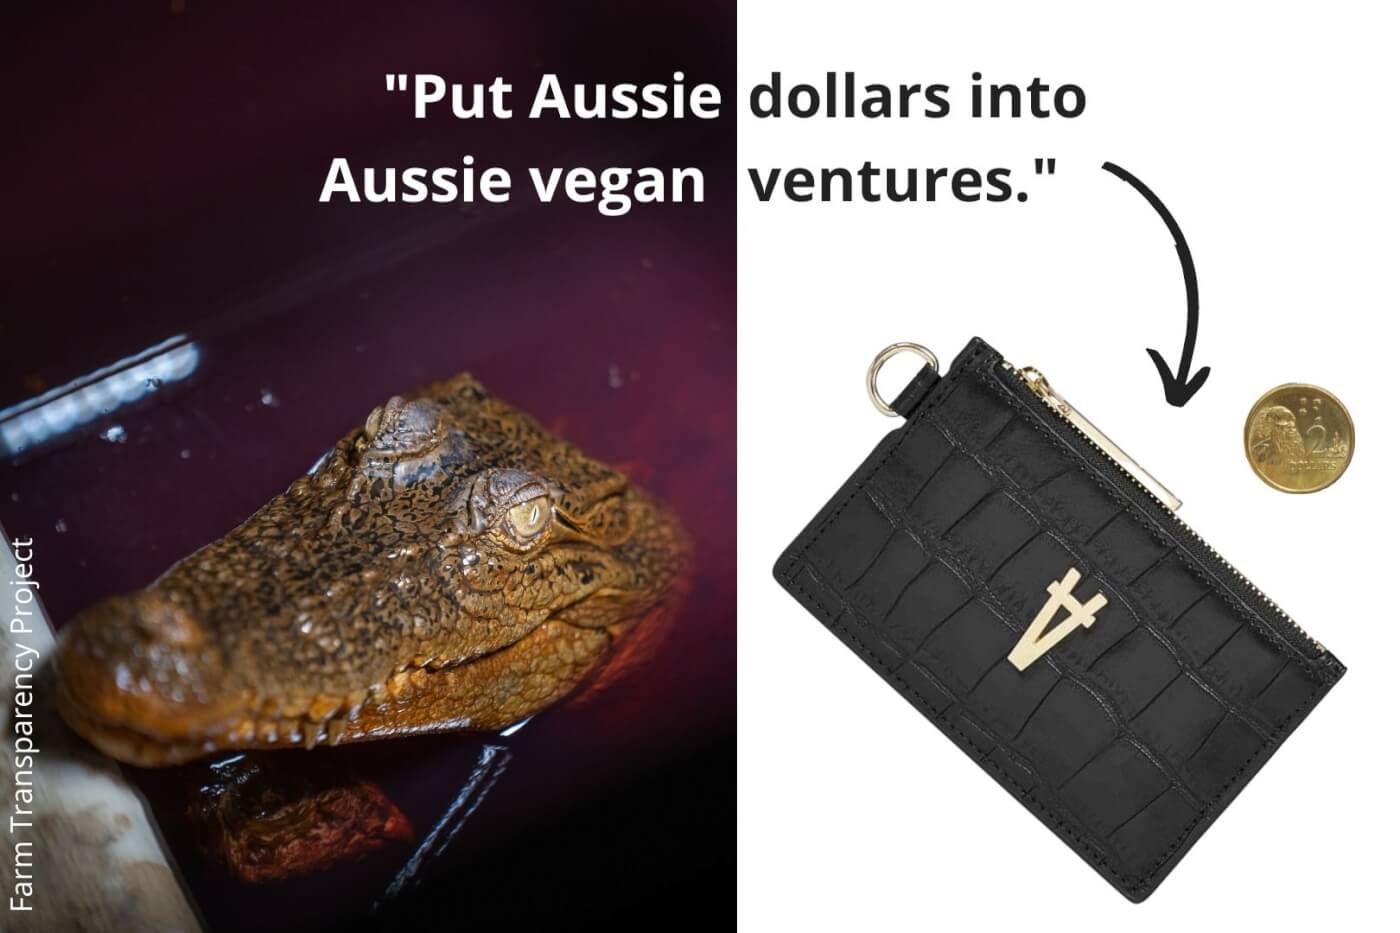 On the left: a crocodile in bloody water on a crocodile farm in Australia. On the right: a Sans Beast vegan crocodile wallet and a gold coin.